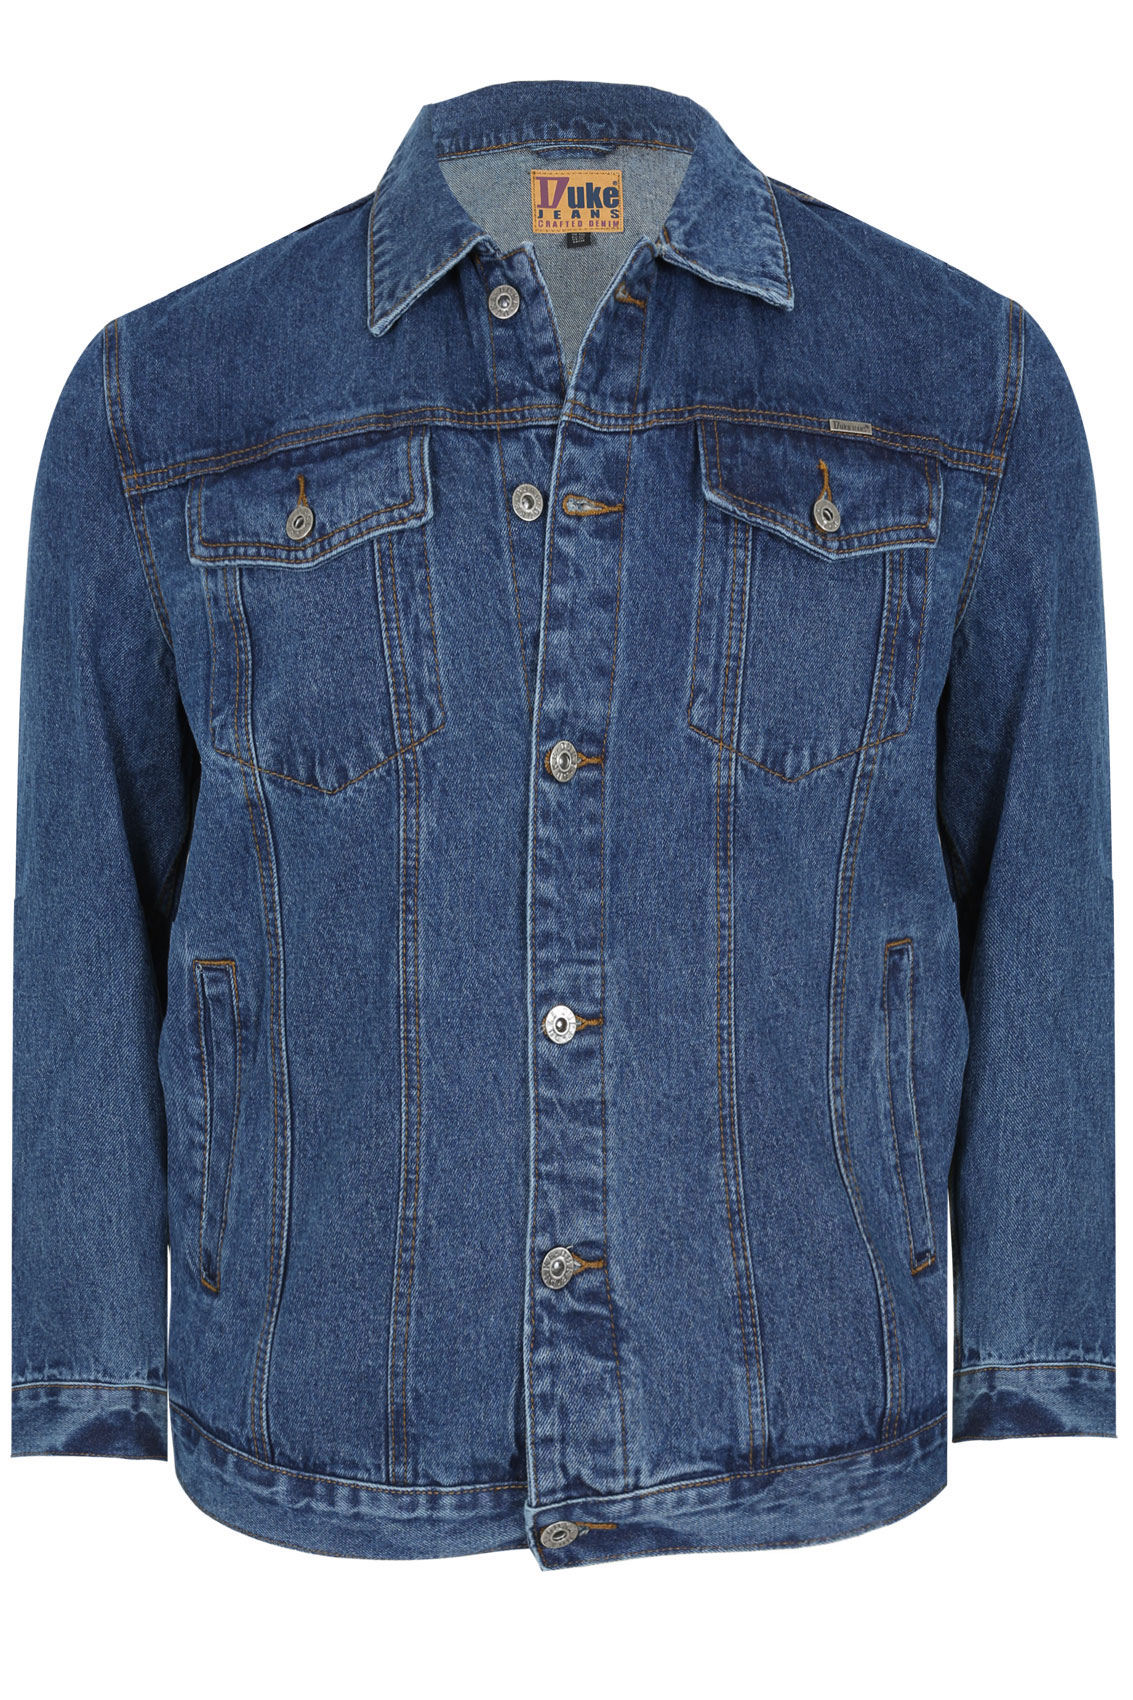 DUKE Denim Jacket With Collar & Button Front Extra Large Sizes 1XL,2XL ...